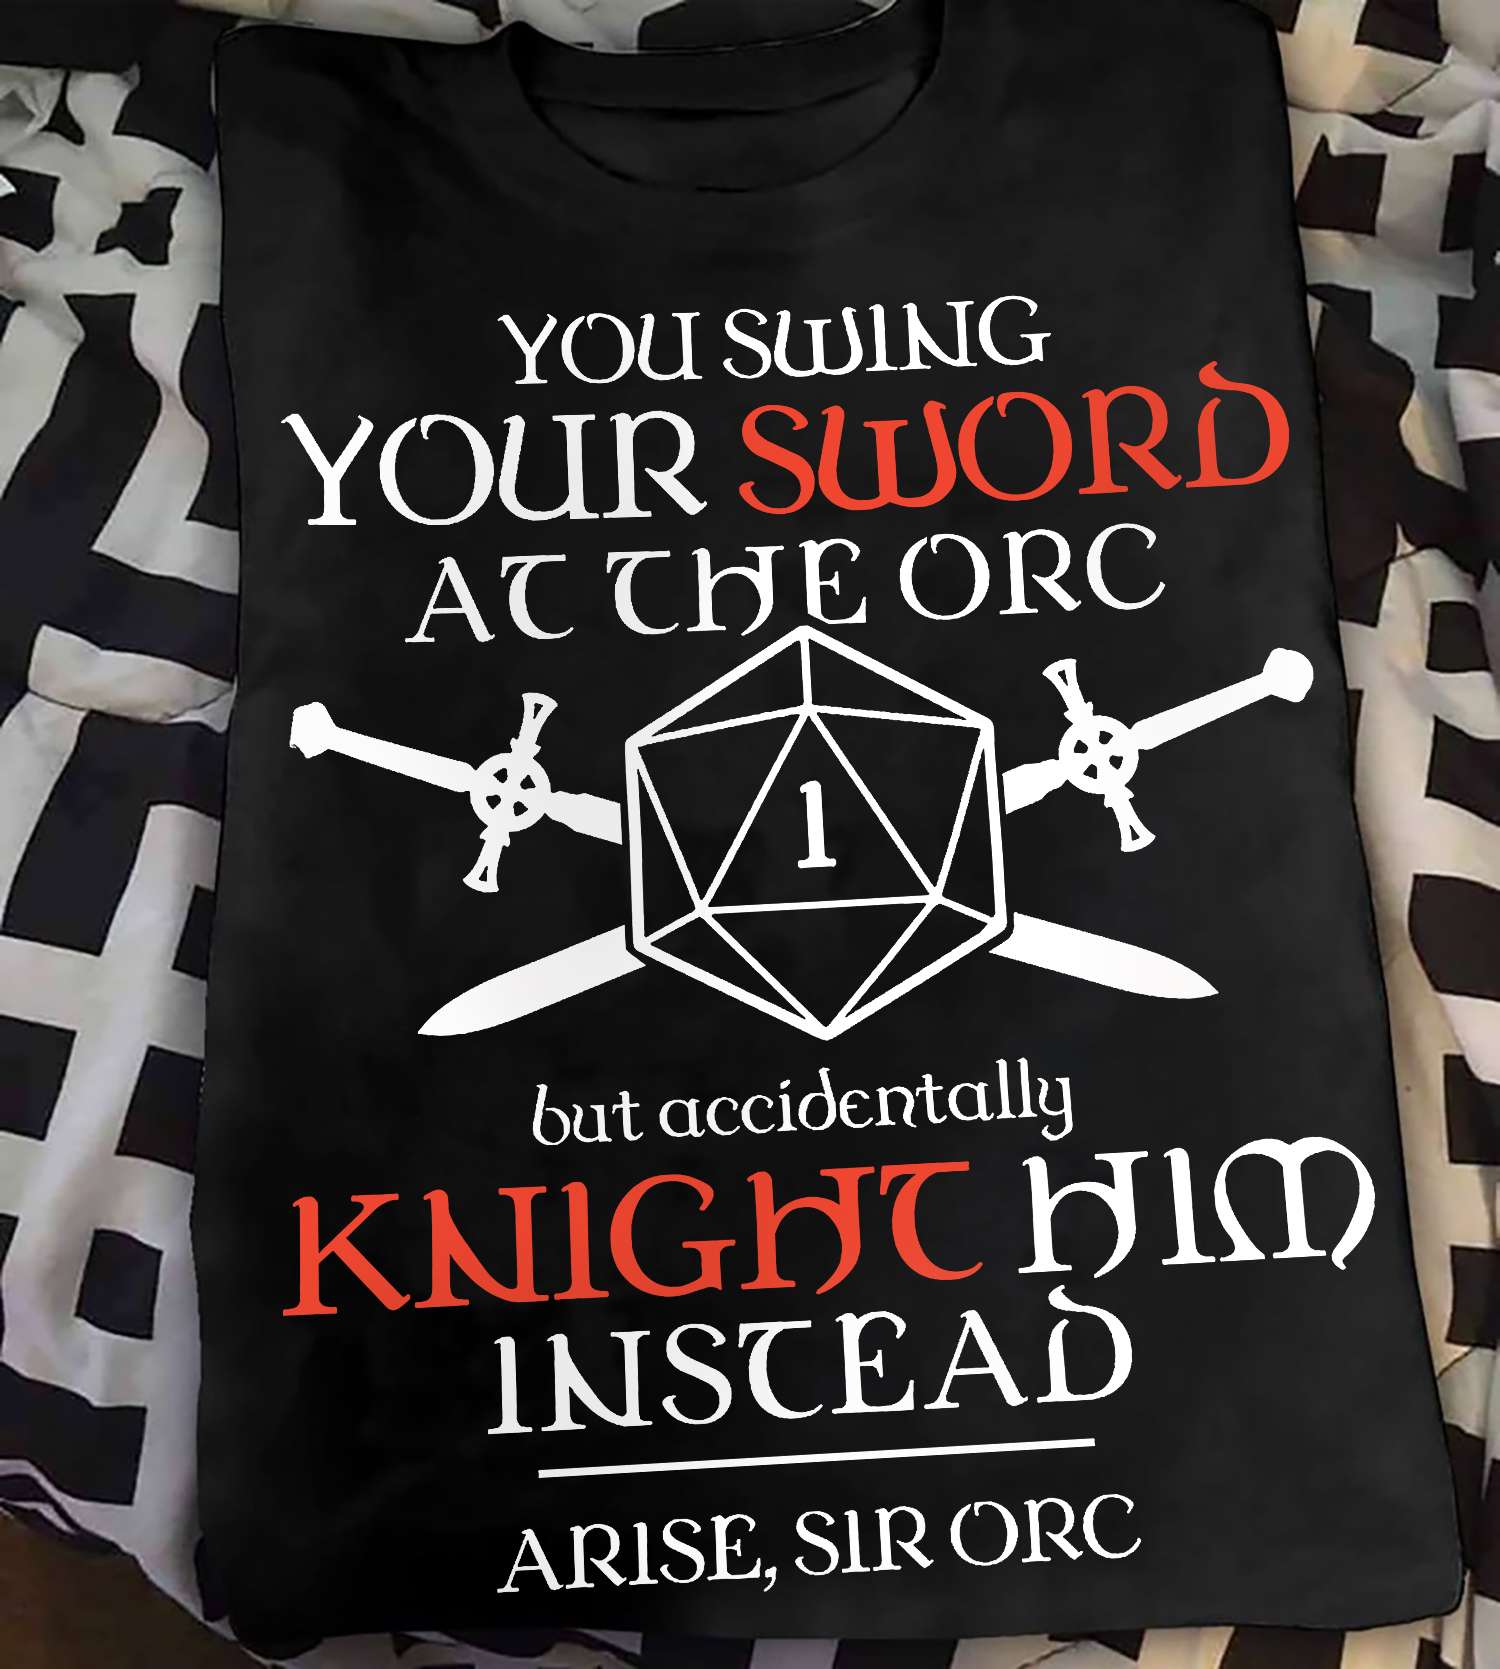 You swing your sword at the orc but accidentally knight him instead - Arise Sir Orc, Critical Failure Game shirt